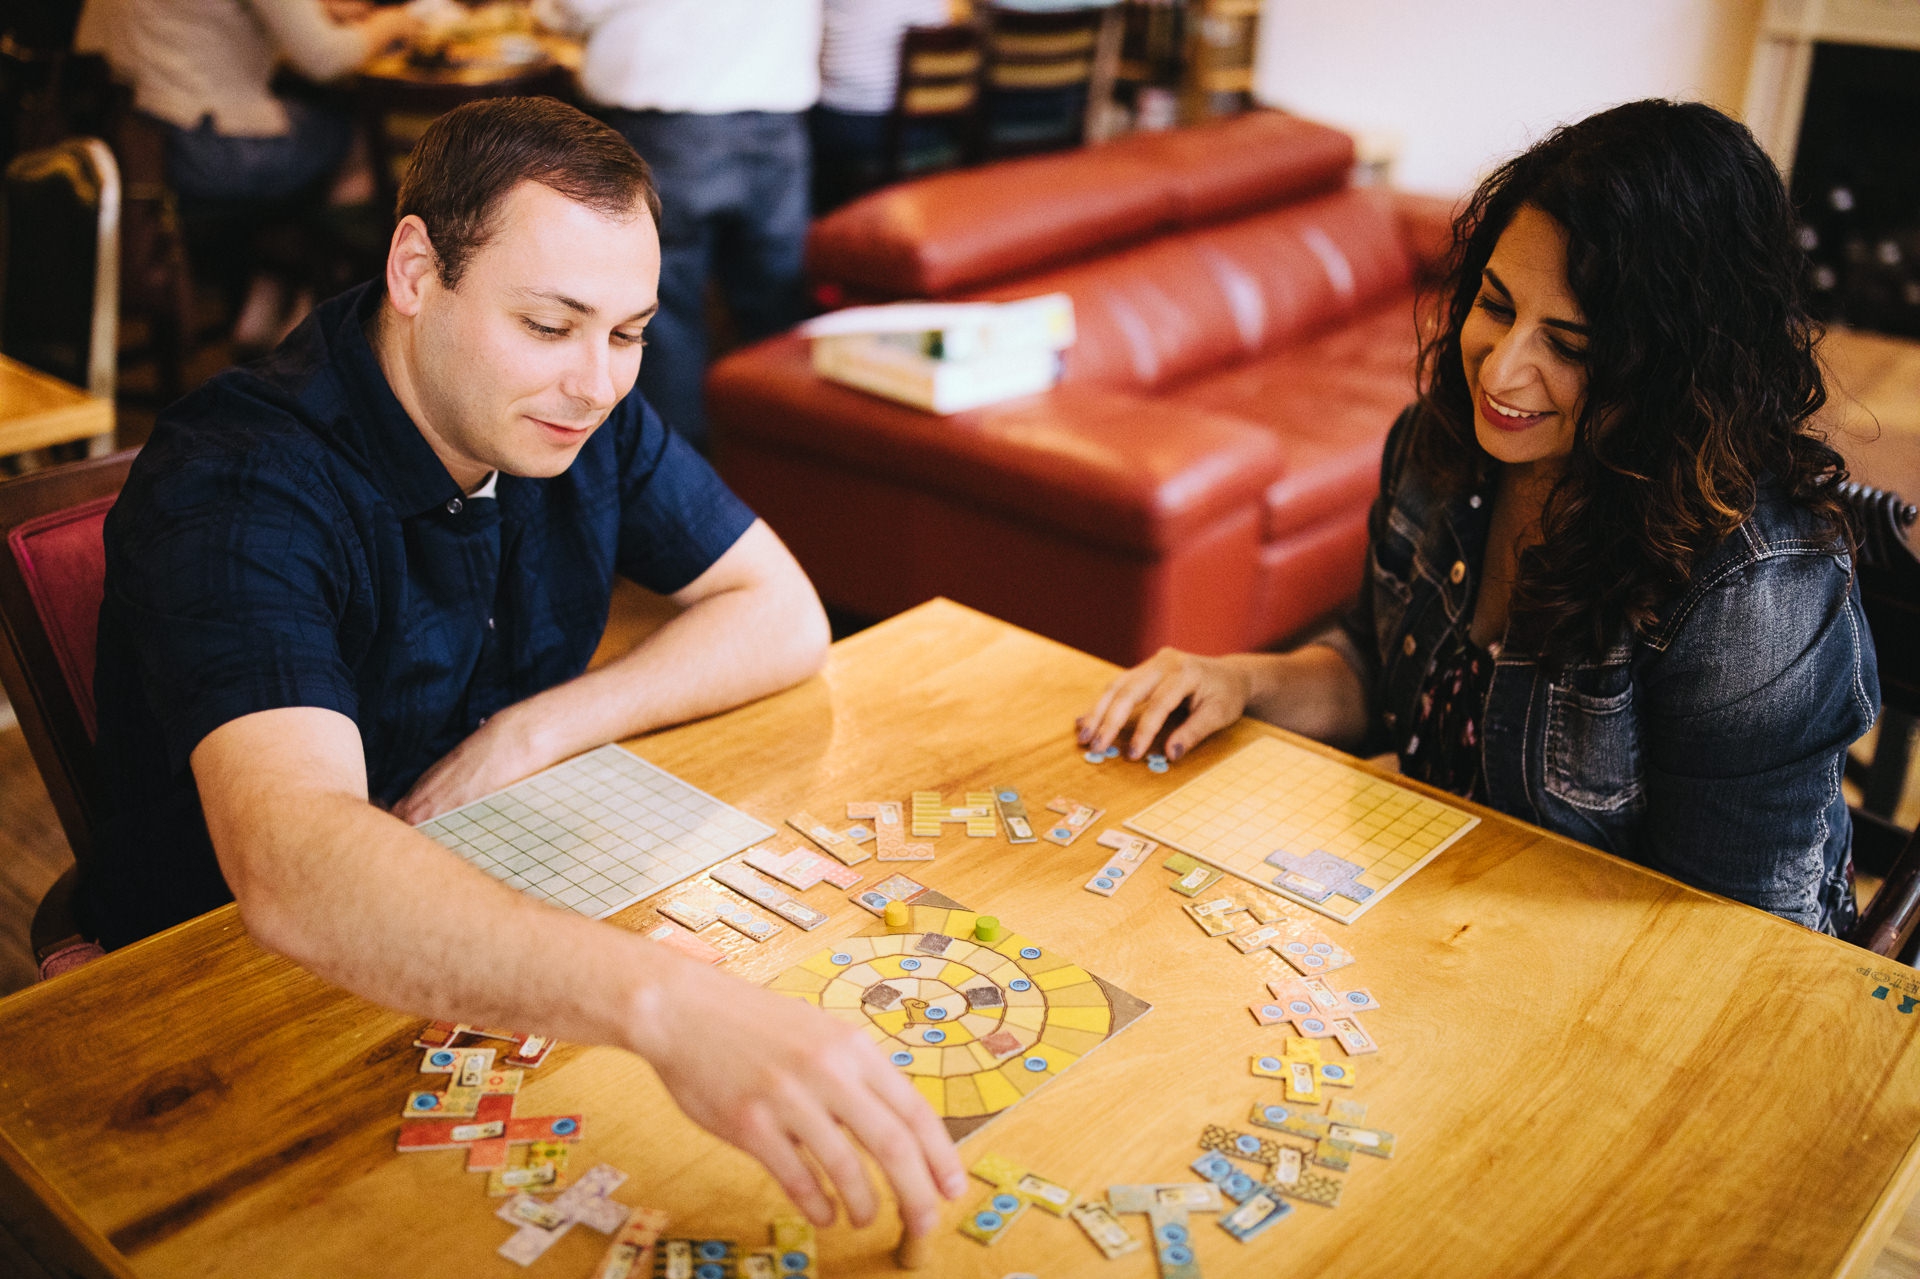 Cleveland Tabletop Board Game Cafe Engagement Photos in Ohio City 10.jpg